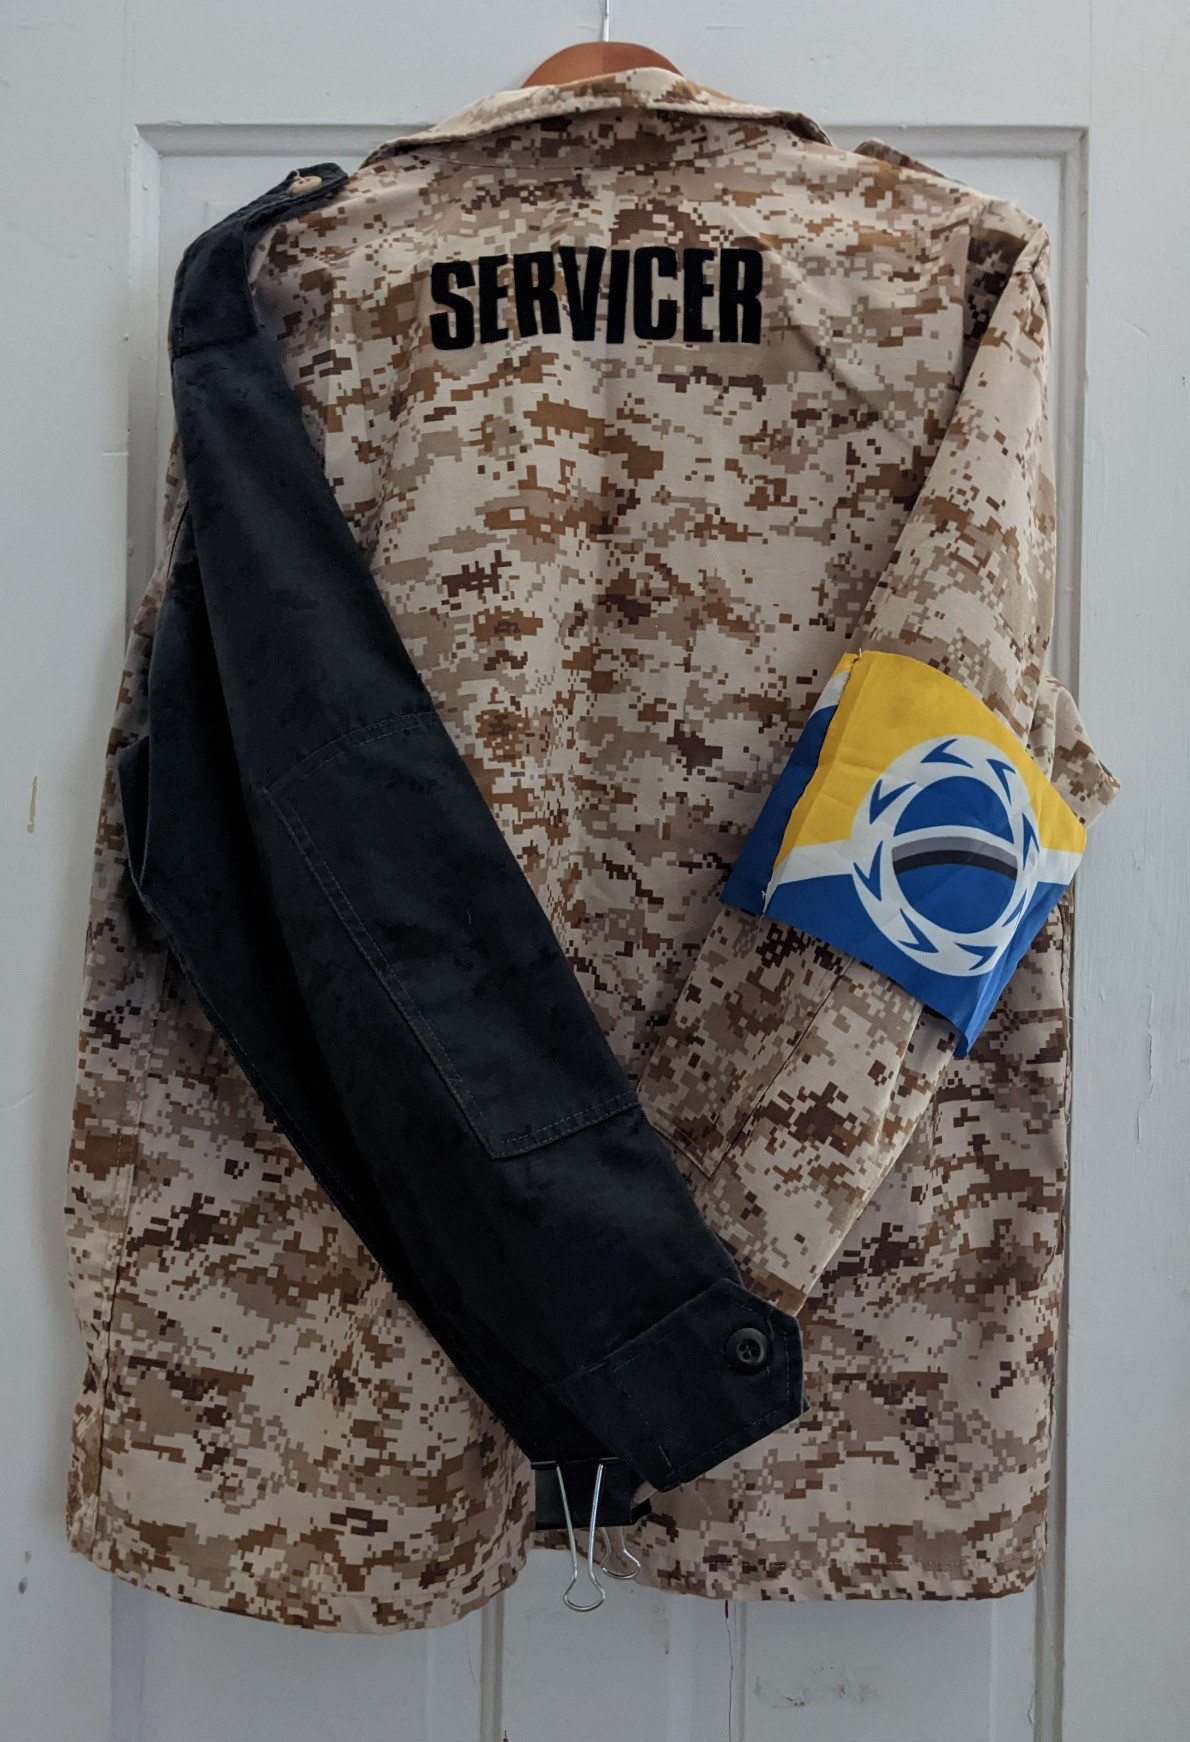 a desert camo coat hangs against a white wall. the left sleeve is dyed black; the right sleeve bears an armband made of yellow, white, and blue flags. Across the shoulders reads the word SERVICER in 1.5 inch high letters.